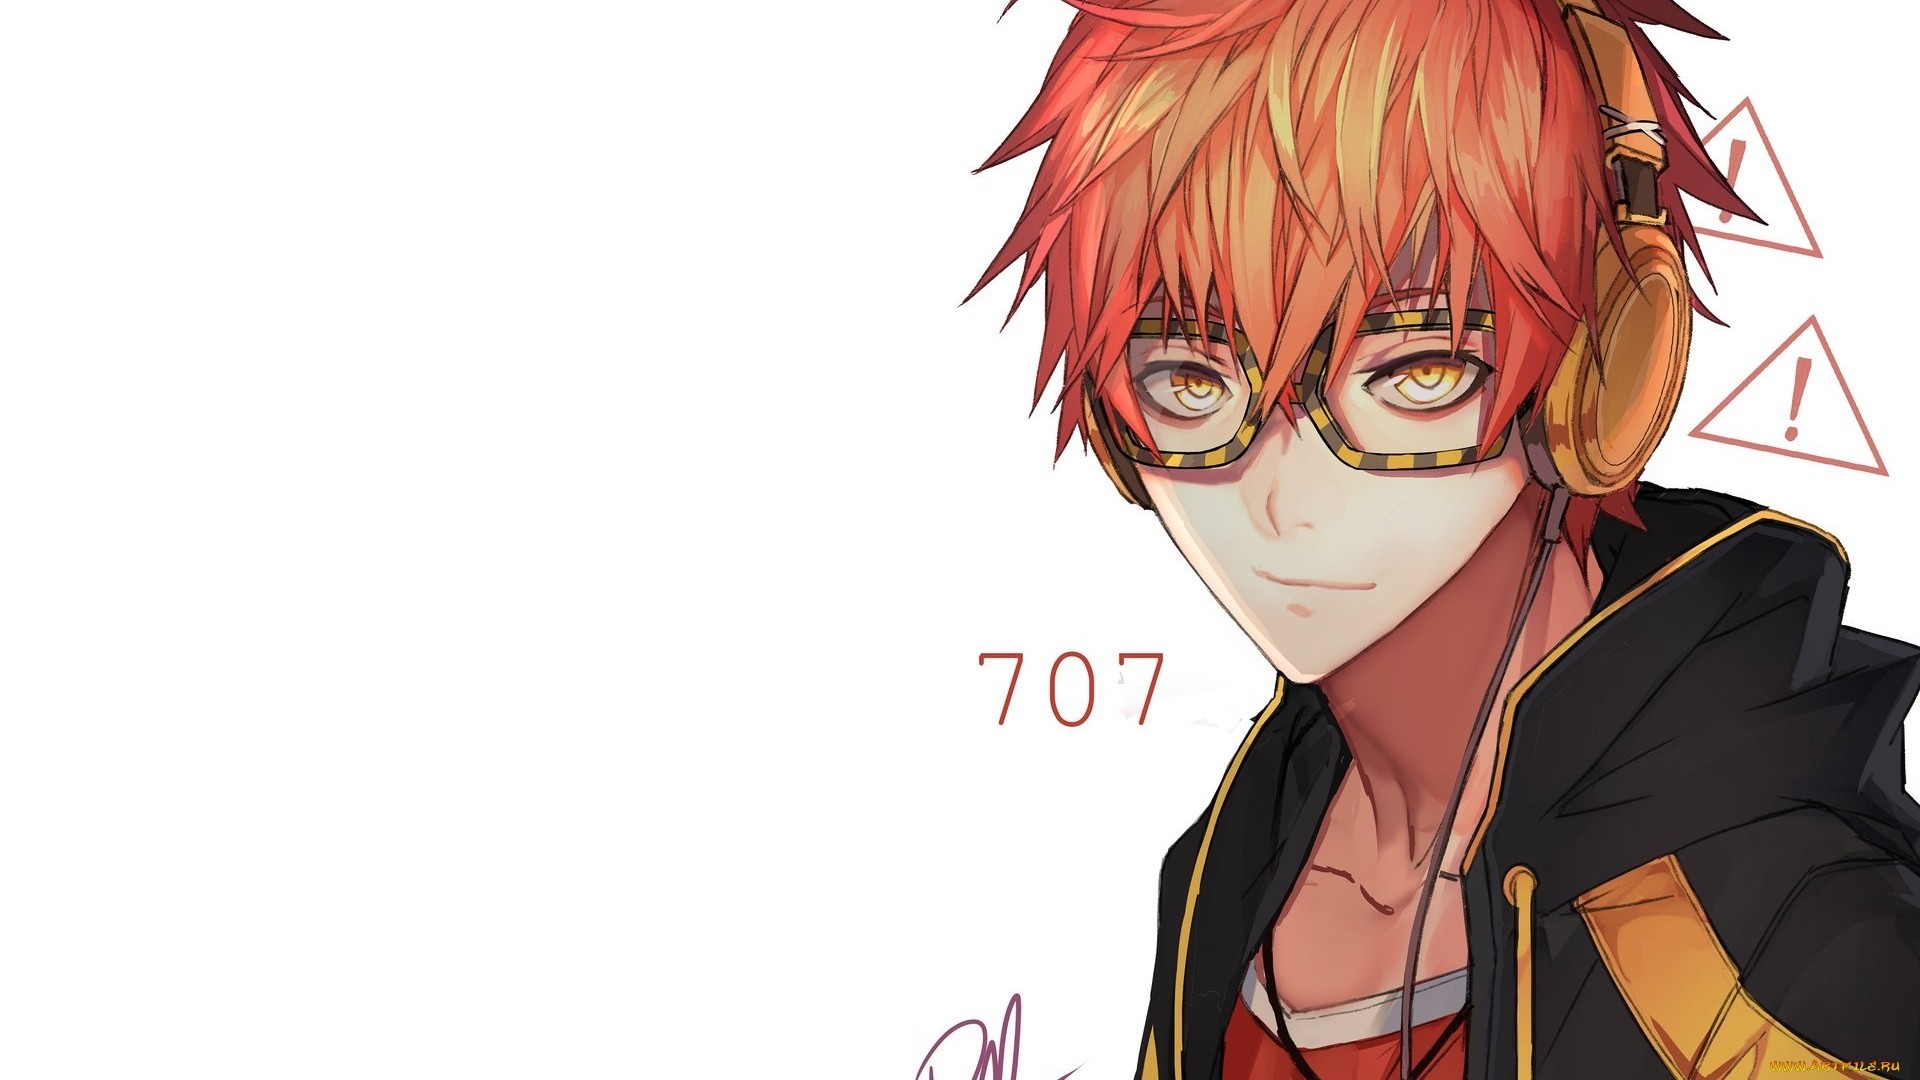 Anime Guy With Glasses Free Wallpaper